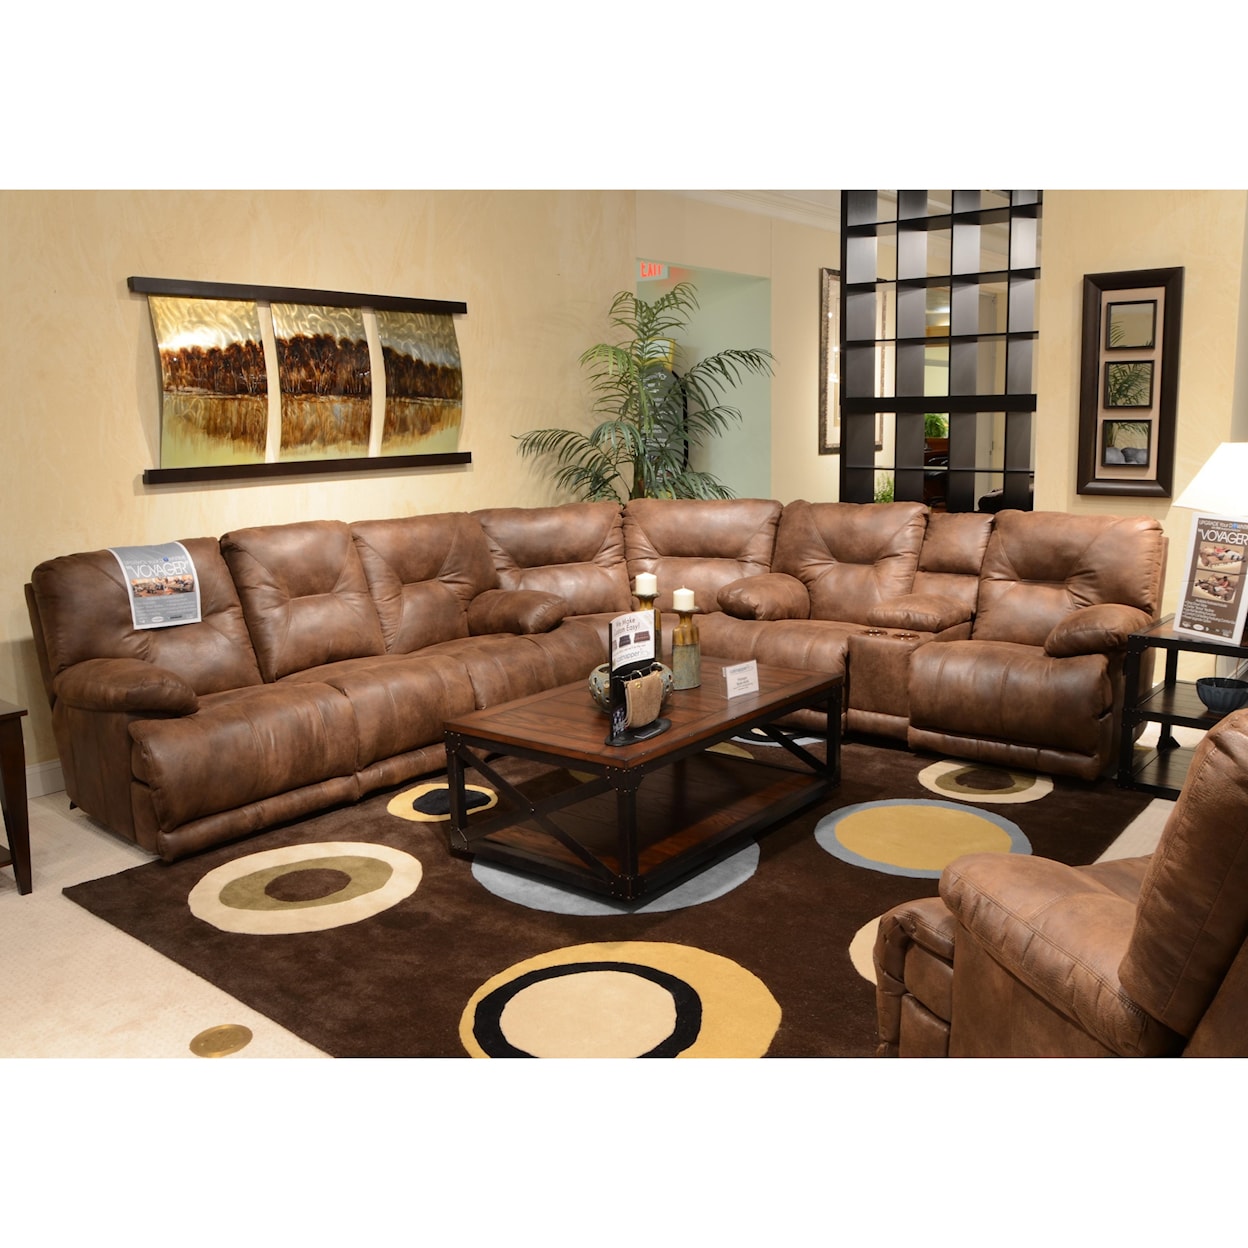 Catnapper 438 Voyager Power Lay Flat Reclining Sectional Seating